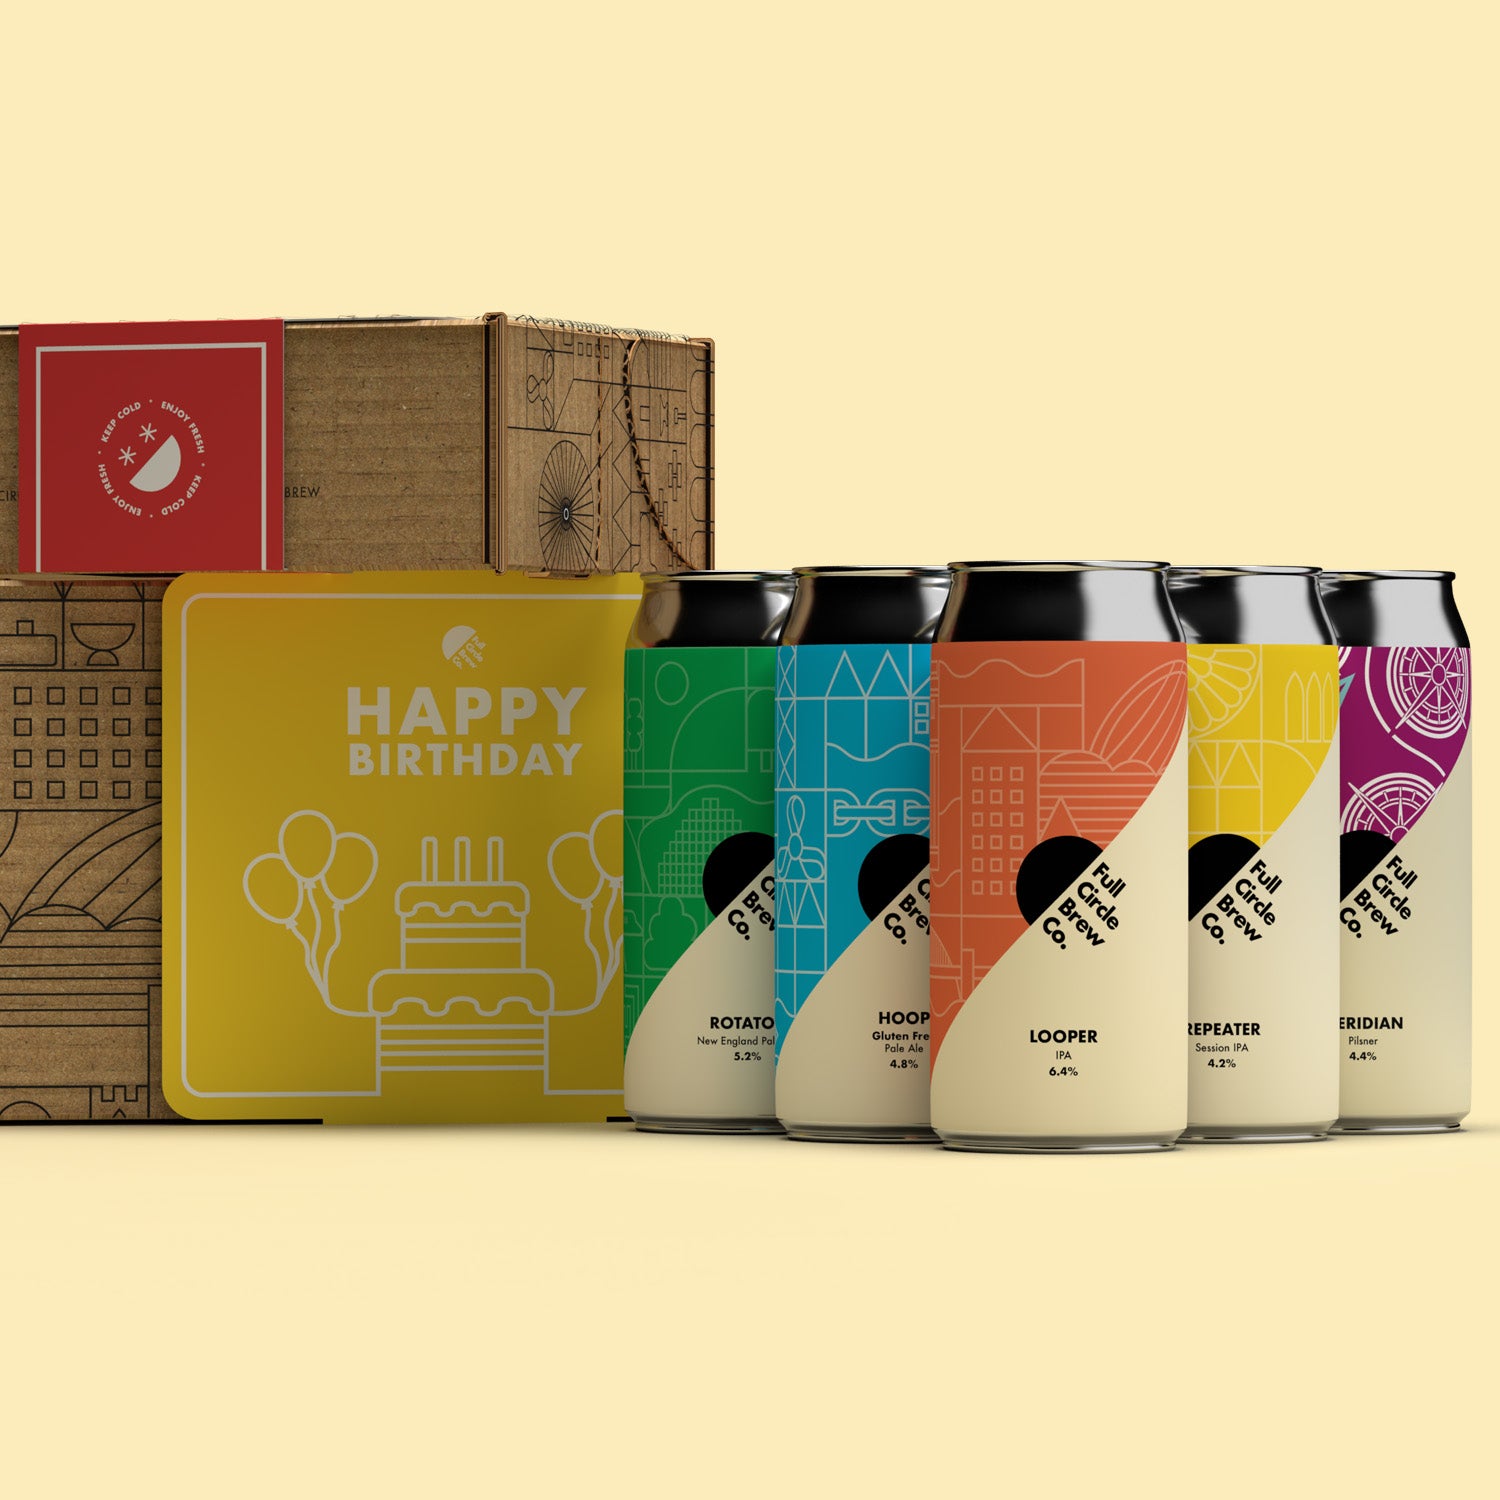 Beer Gifts | The Great British Beers Gift Box